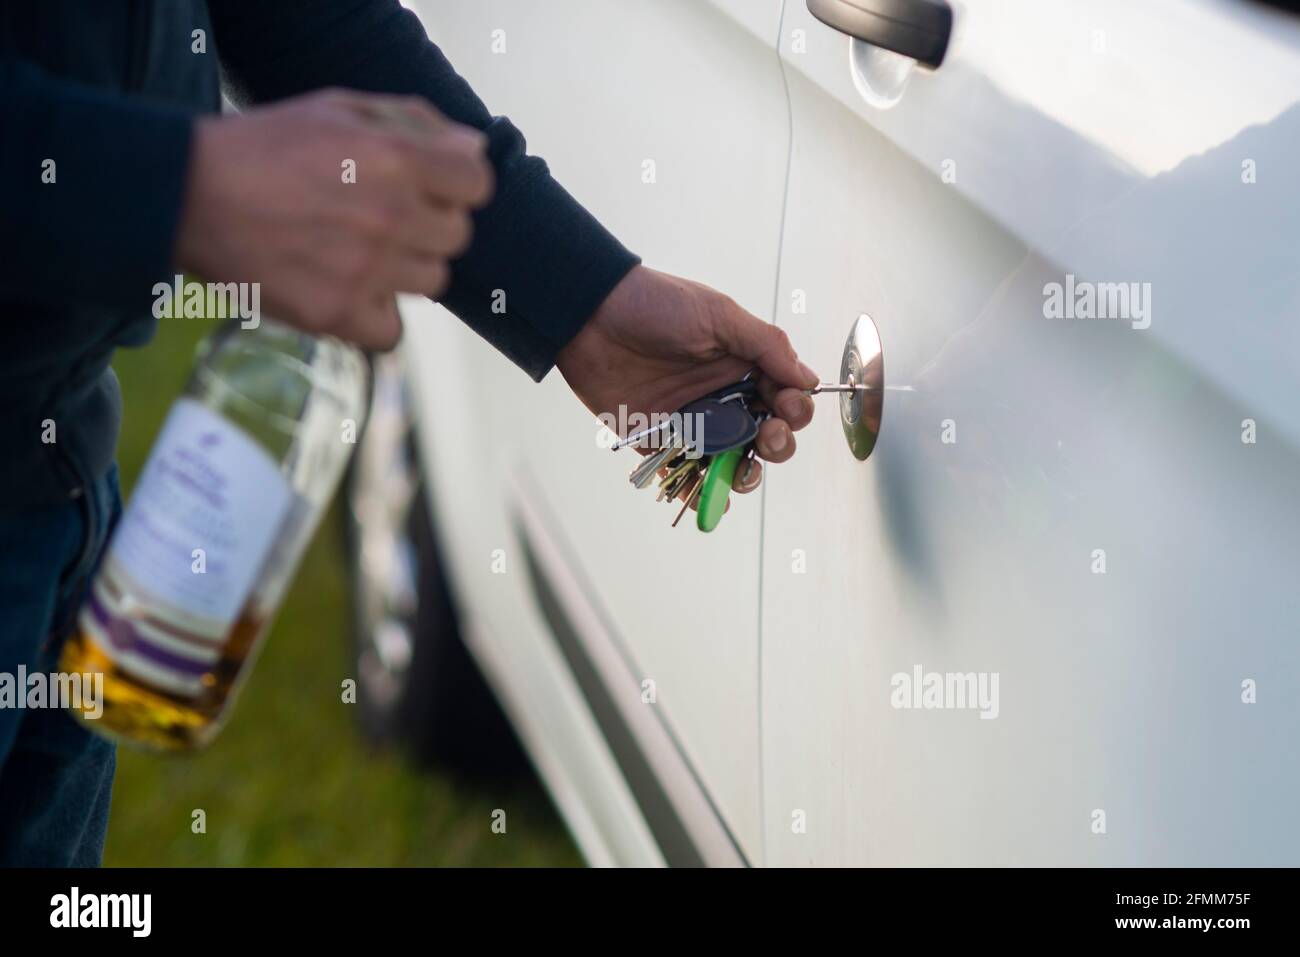 Drunk in charge of a motorhome campervan. A man unlocks his van door with a bottle of whisky alcohol  in his hand. Drink driving England UK Stock Photo